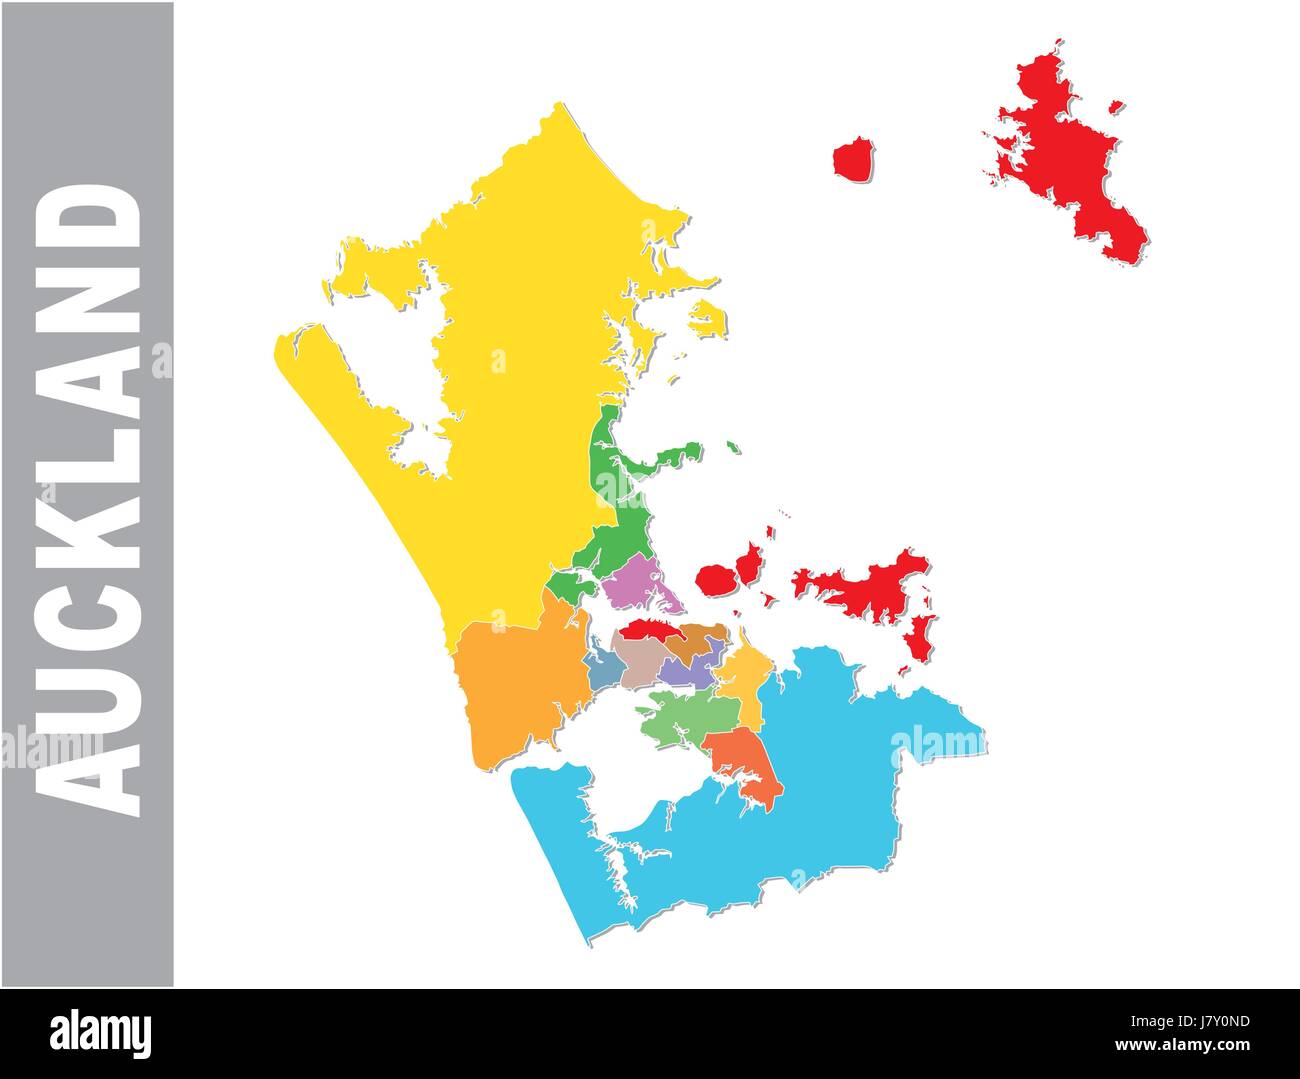 Colorful Auckland Administrative And Political Vector Map J7Y0ND 